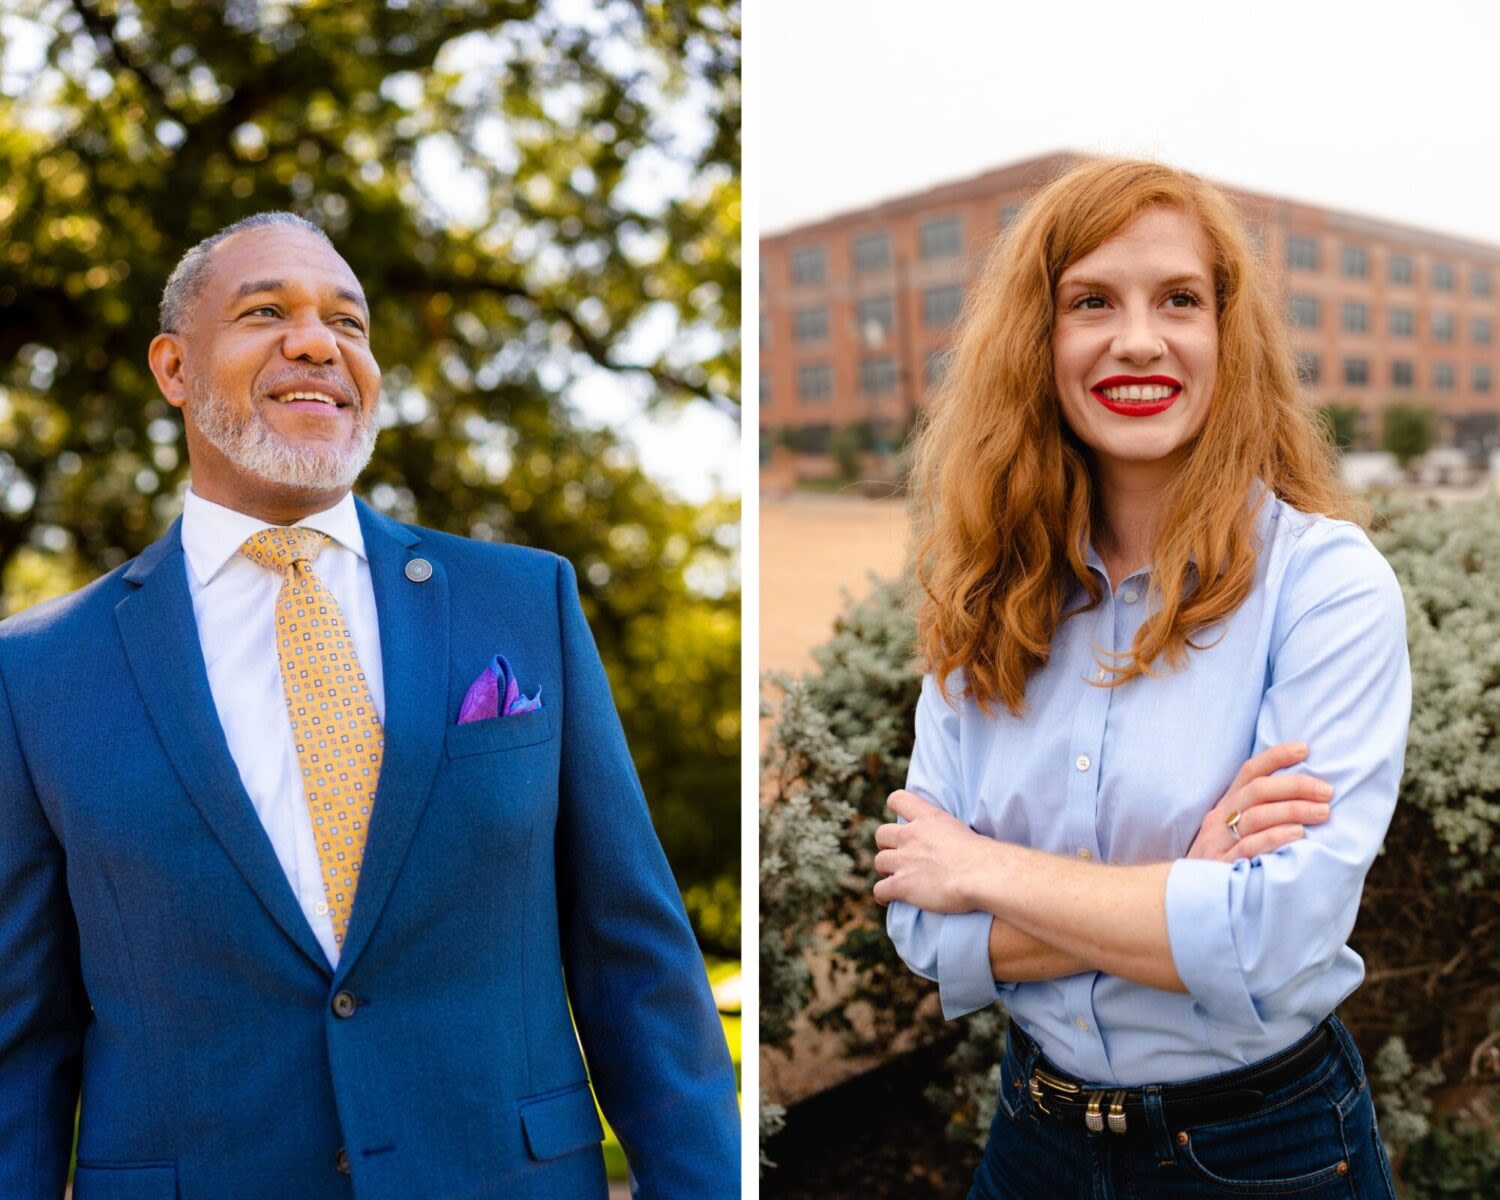 Molly Cook defeats State Rep. Jarvis Johnson in special election for Senate District 15 | Houston Public Media